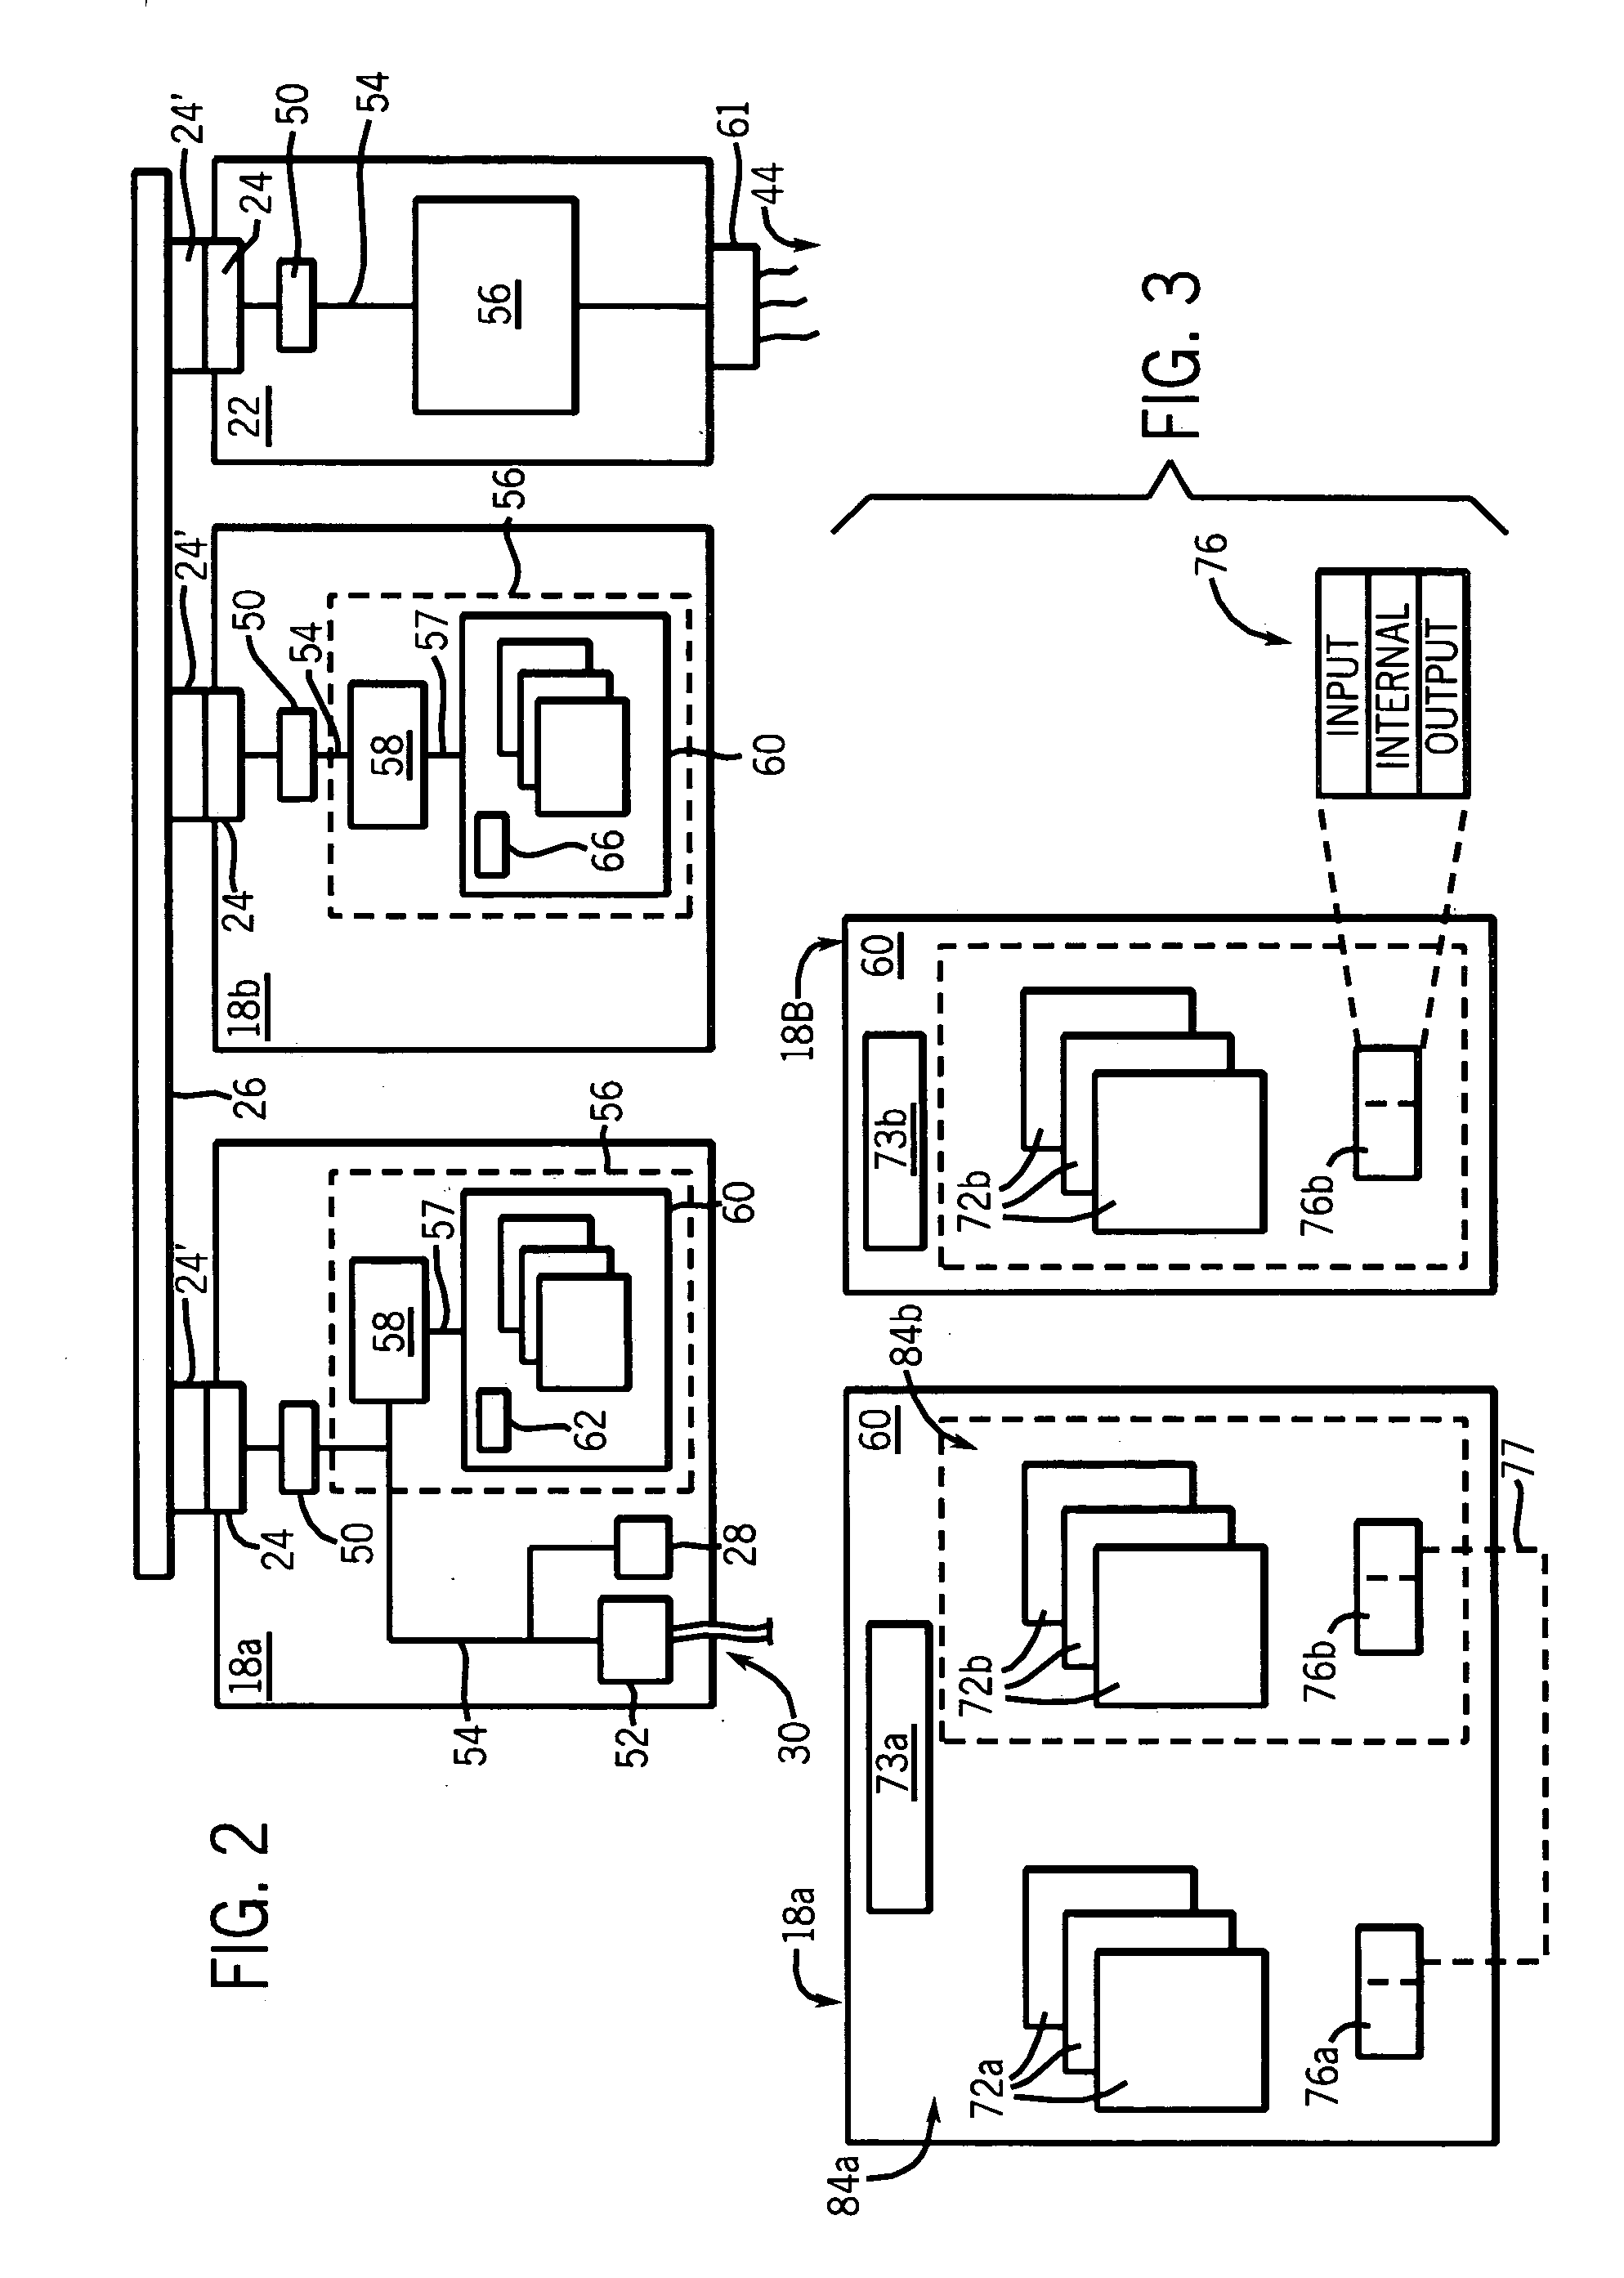 Safety controller providing for execution of standard and safety control programs